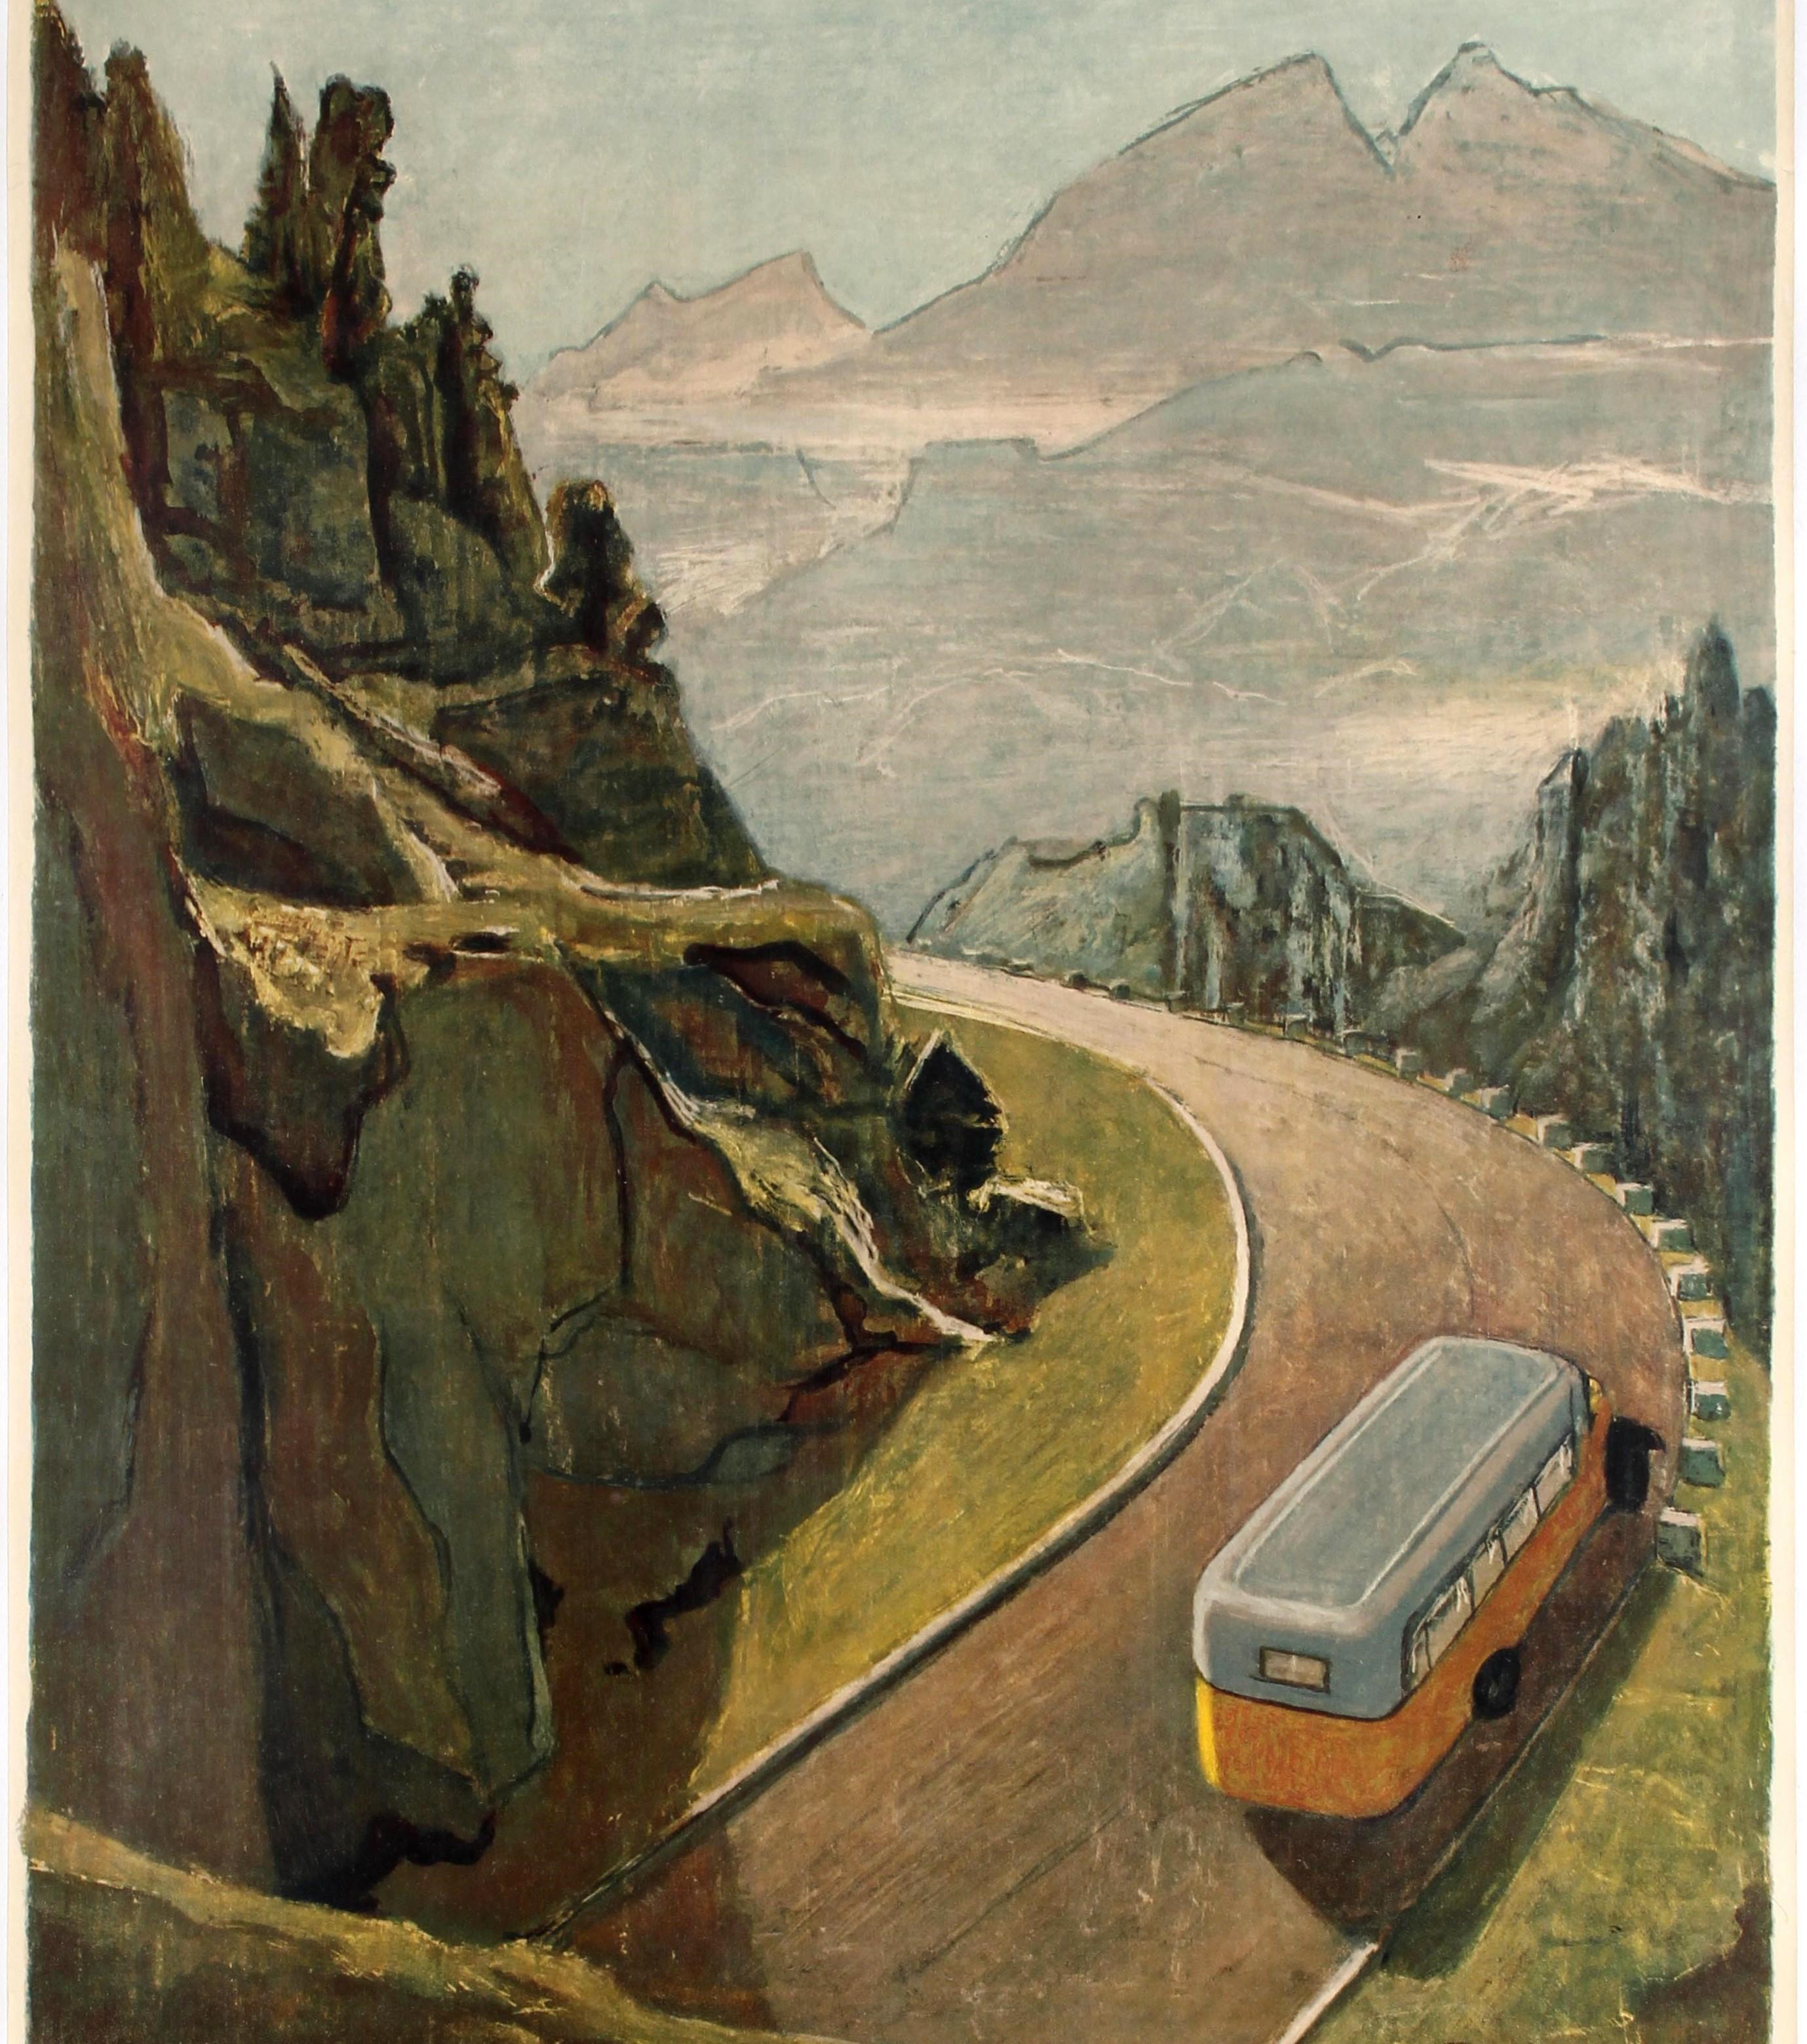 Original vintage poster by the Swiss painter Victor Surbek (1885-1975) in French - Suisse Postes Alpestres - depicting a scenic image of a white and yellow Alpine Postal Motor Bus driving on a curving mountain road in light sunshine with rocks on